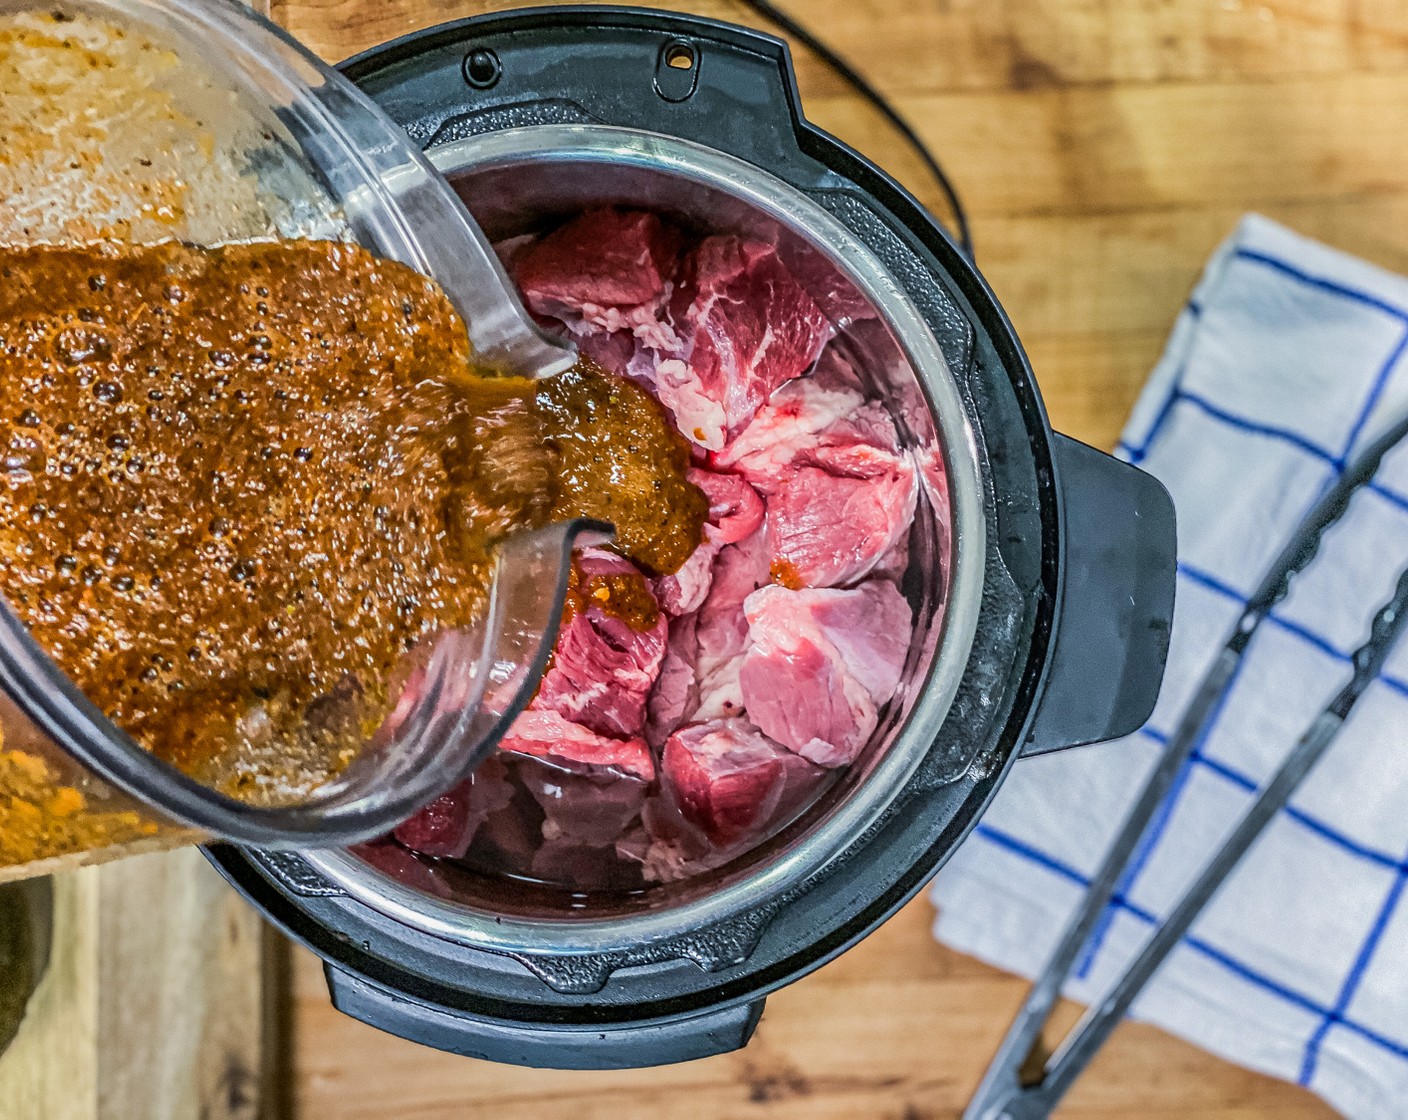 step 4 Add Boneless Chuck Roast (2 lb), Water (2 cups), and marinade to the instant pot. Cover, and cook on pressure cook high for 90 minutes.